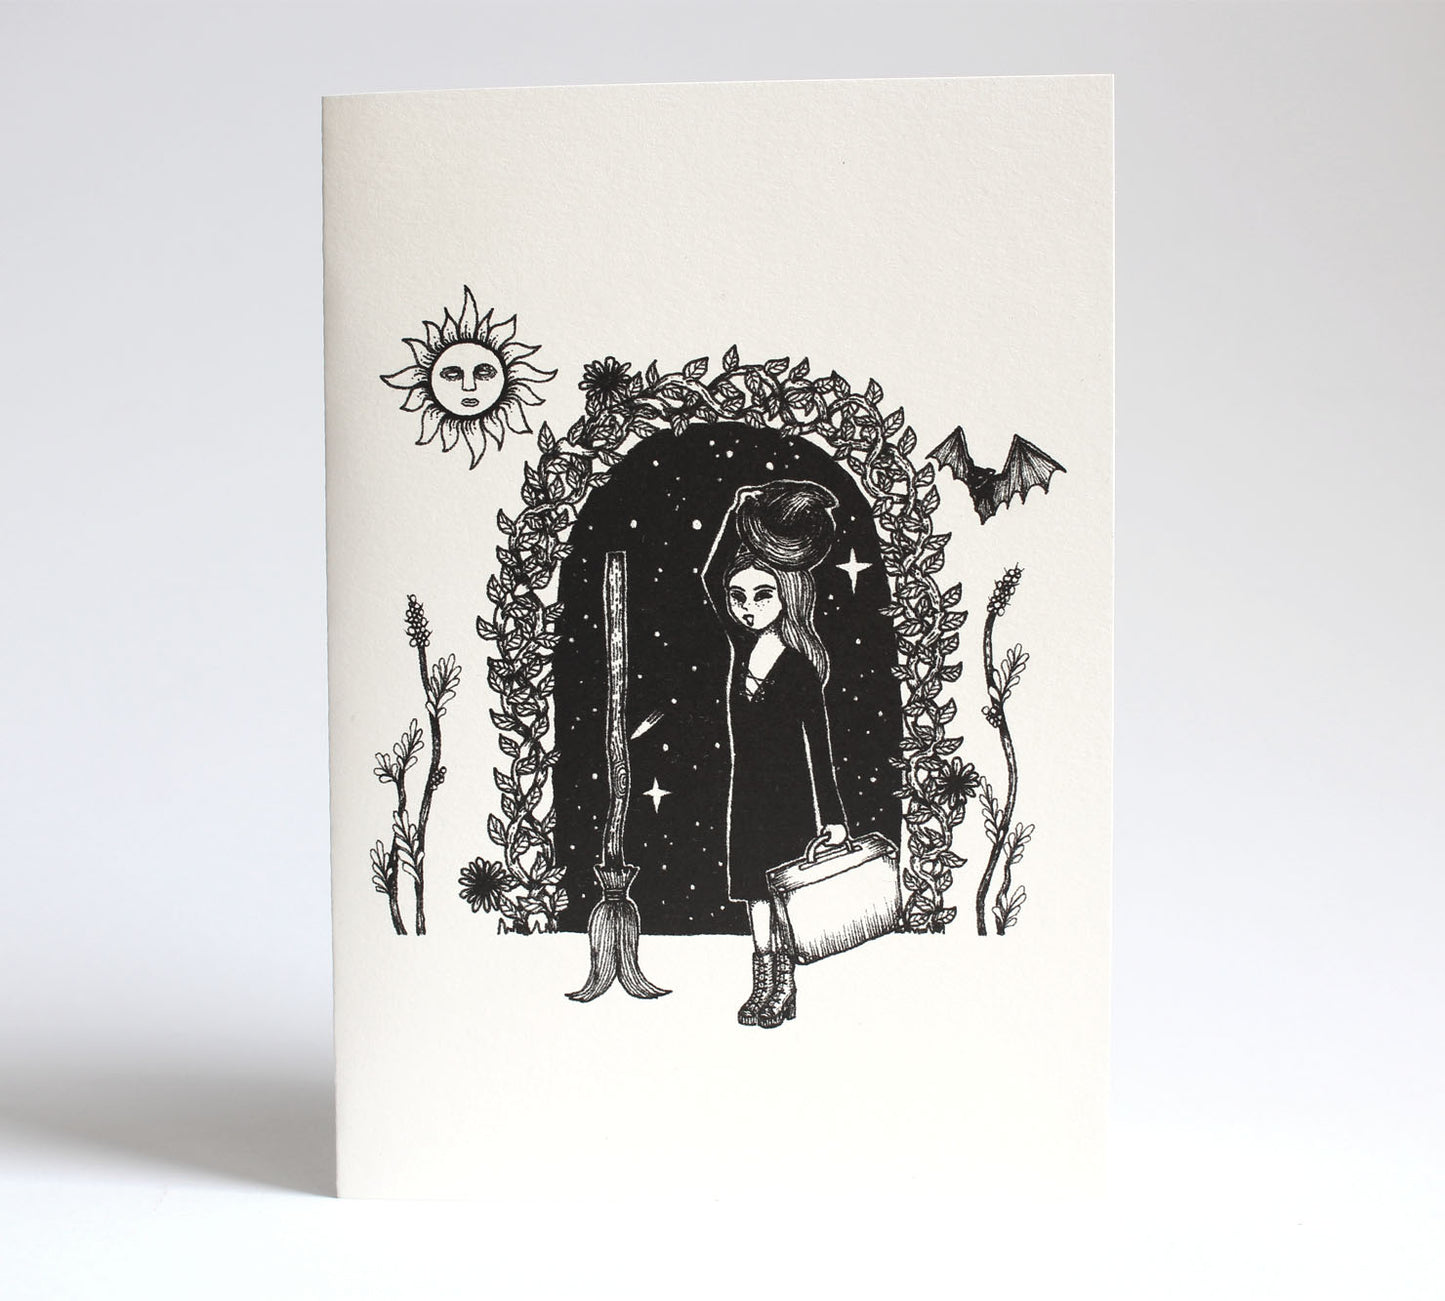 OFF TO THE NIGHT FAREWELL WITCH GREETING CARD